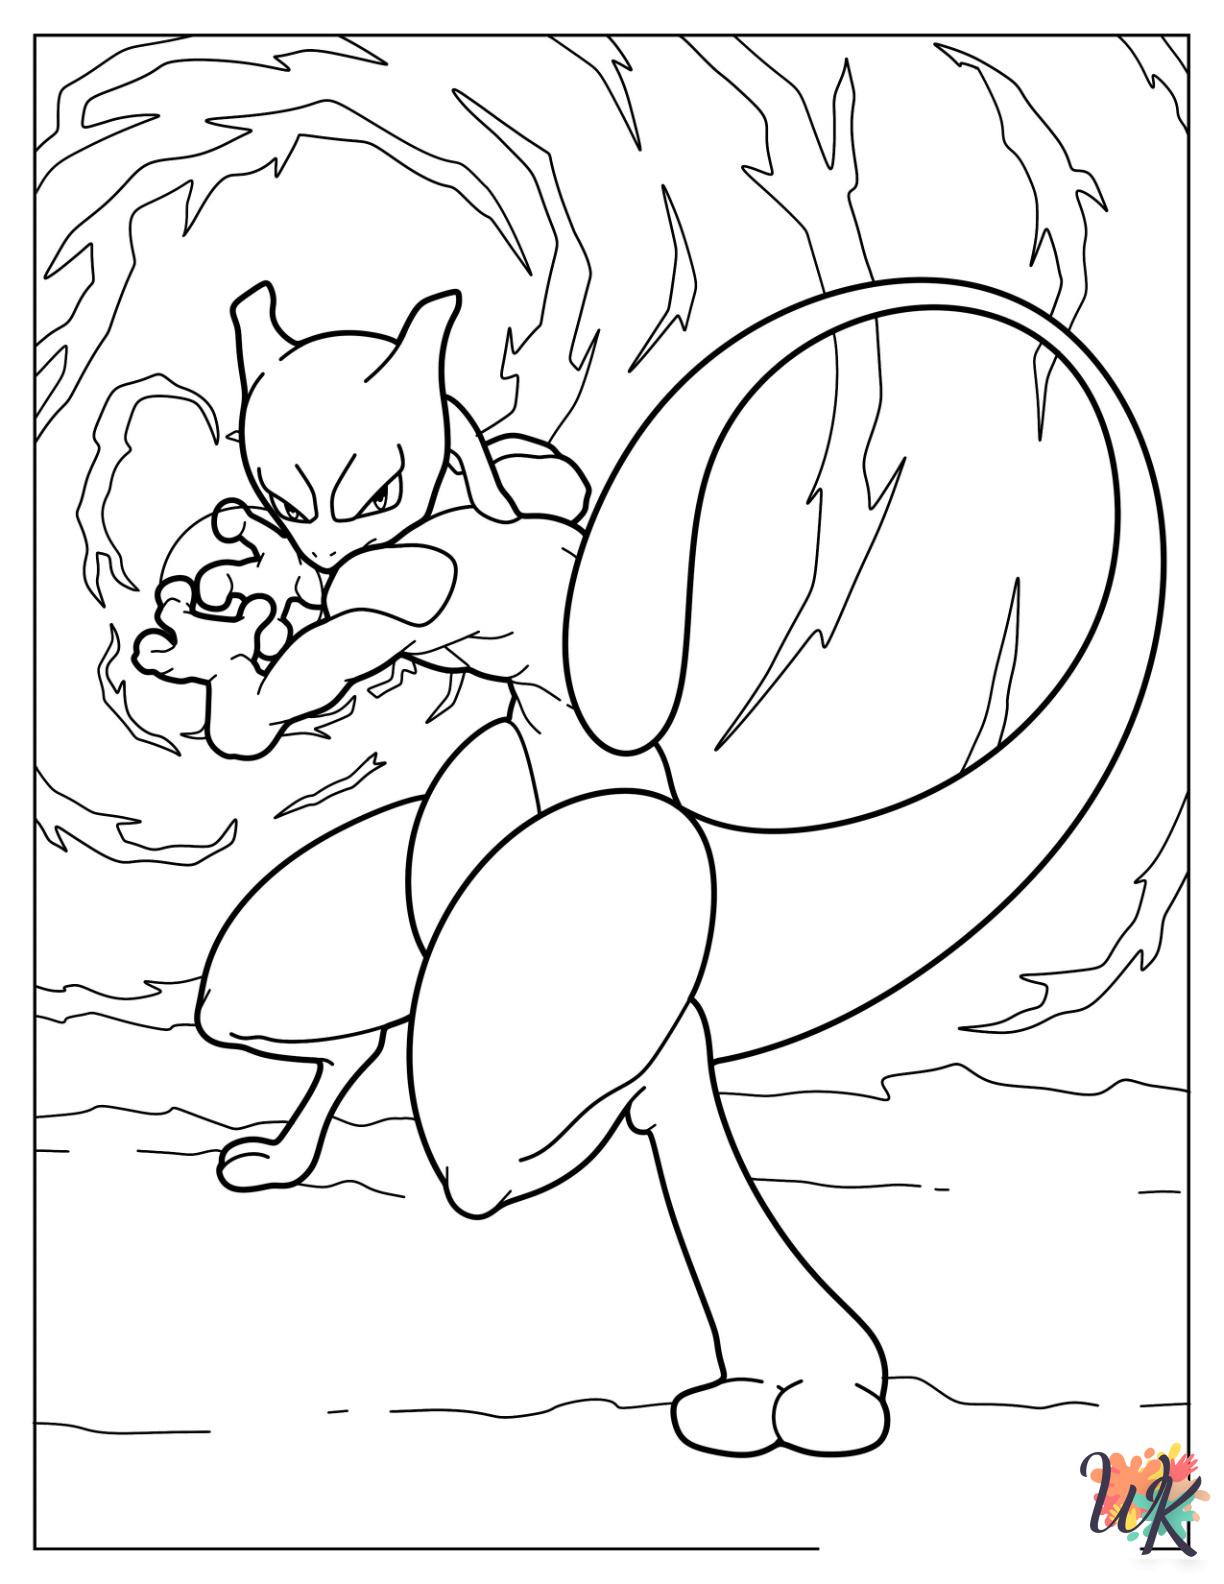 Mewtwo coloring pages free printable 1